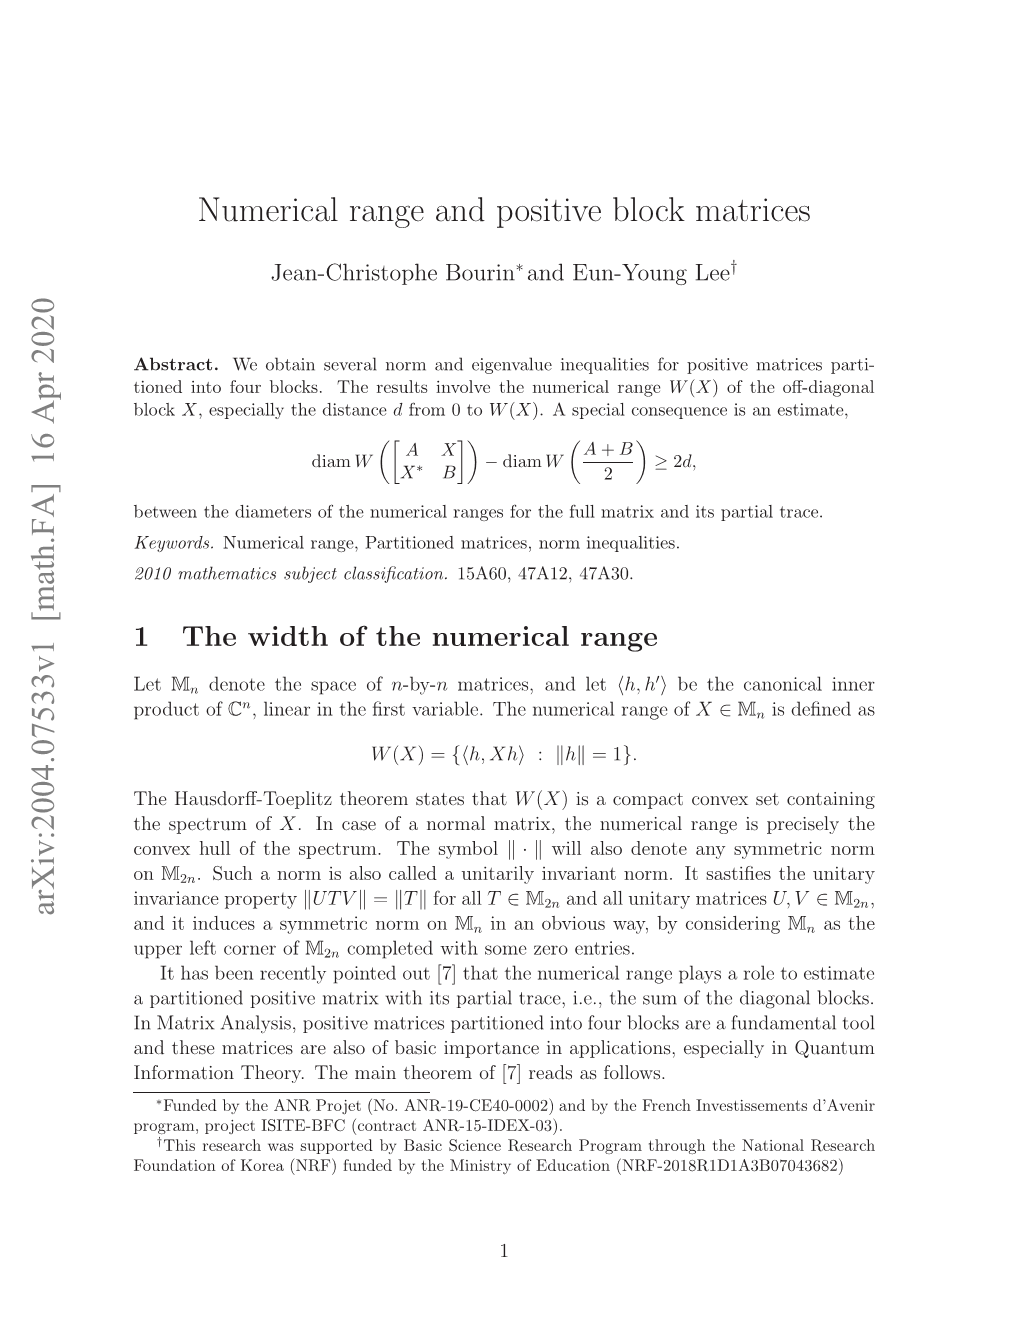 Numerical Range and Positive Block Matrices